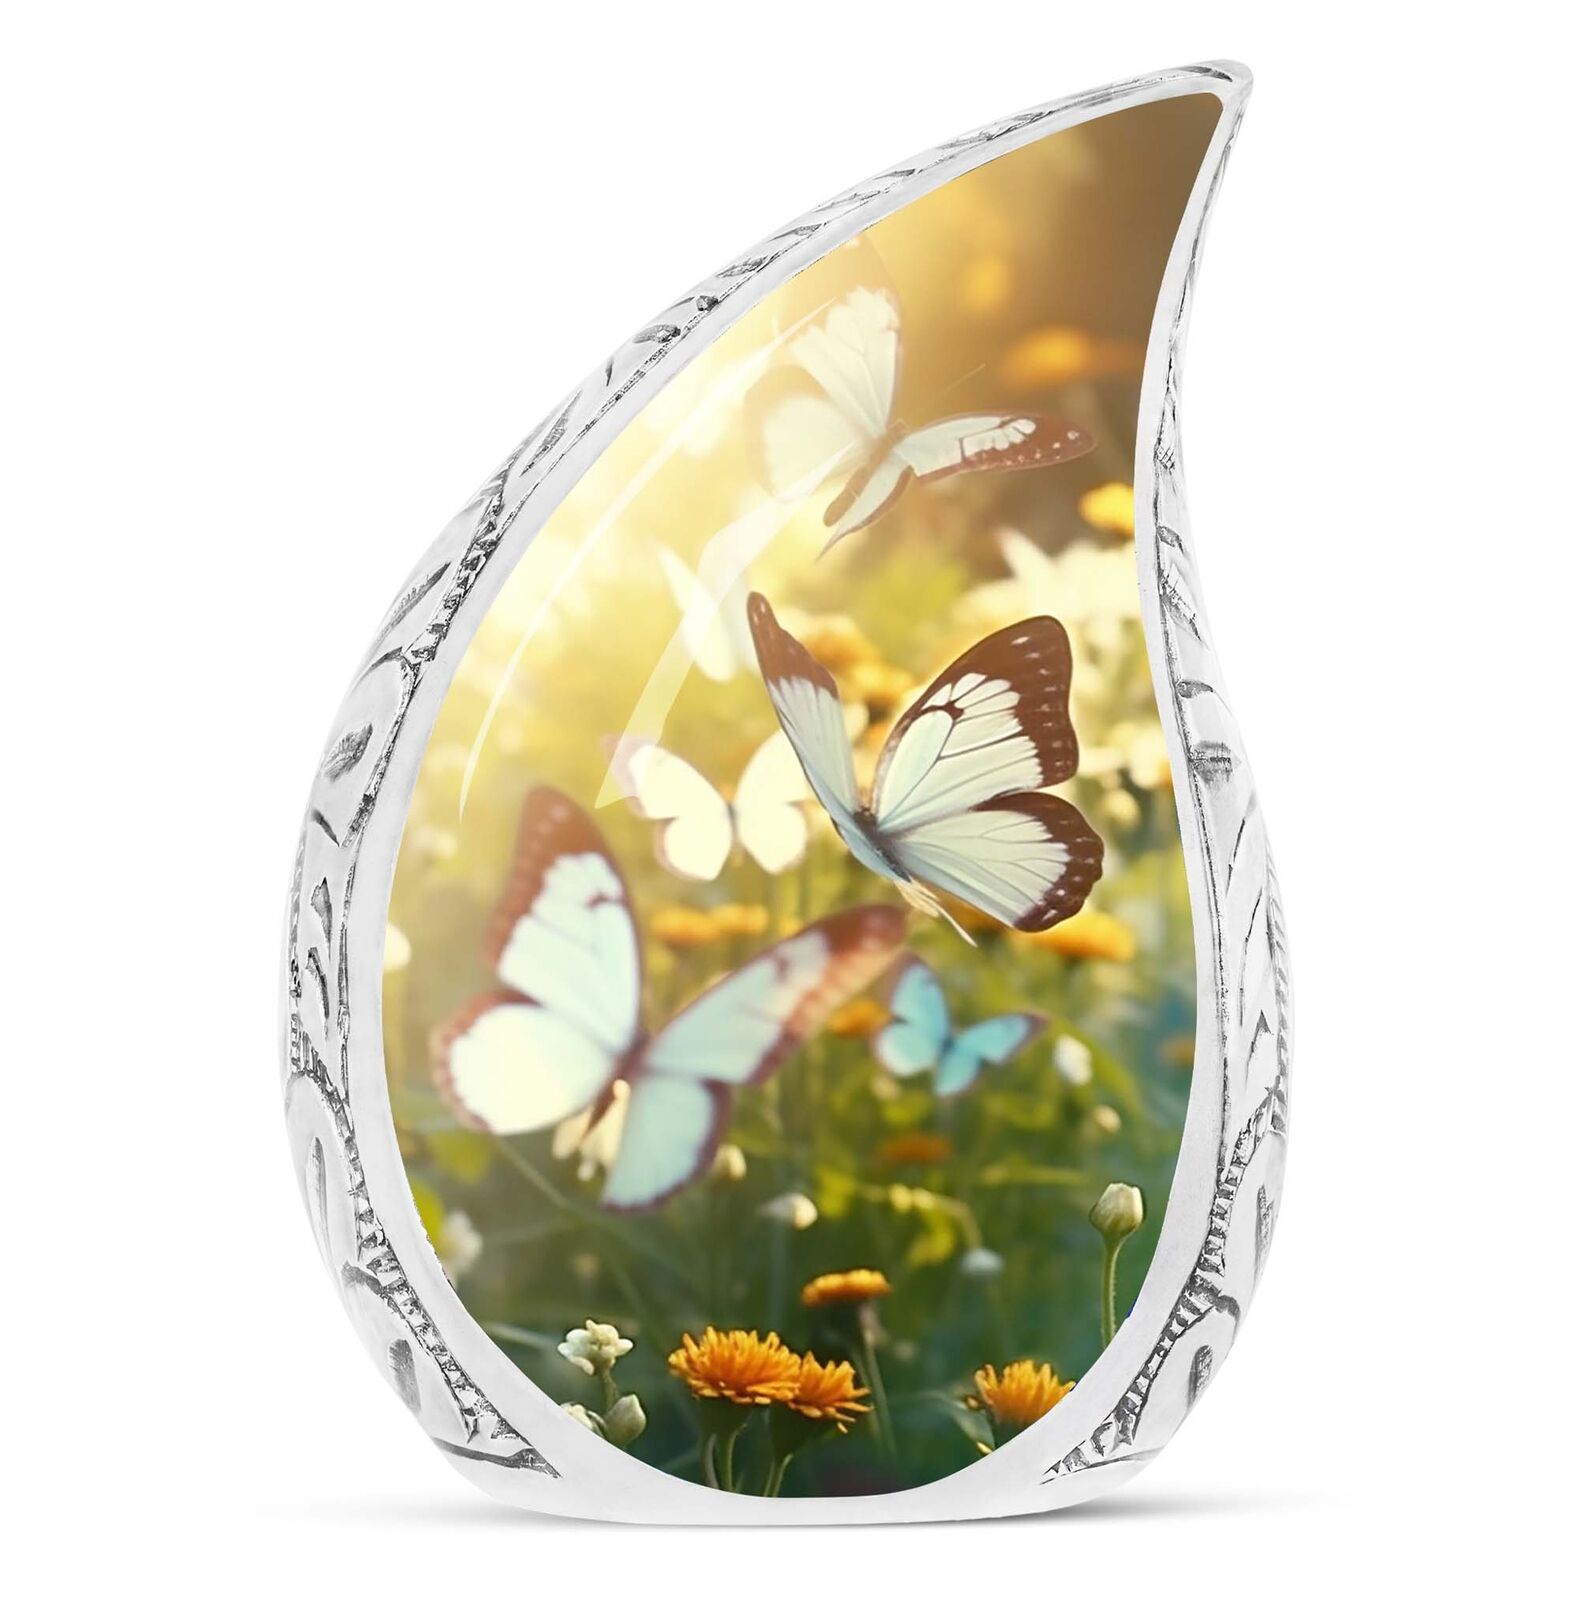 Teardrop UrnButterflies Fly In A Sunset Meadow Urns For Human Ashes Adult 3 Inch